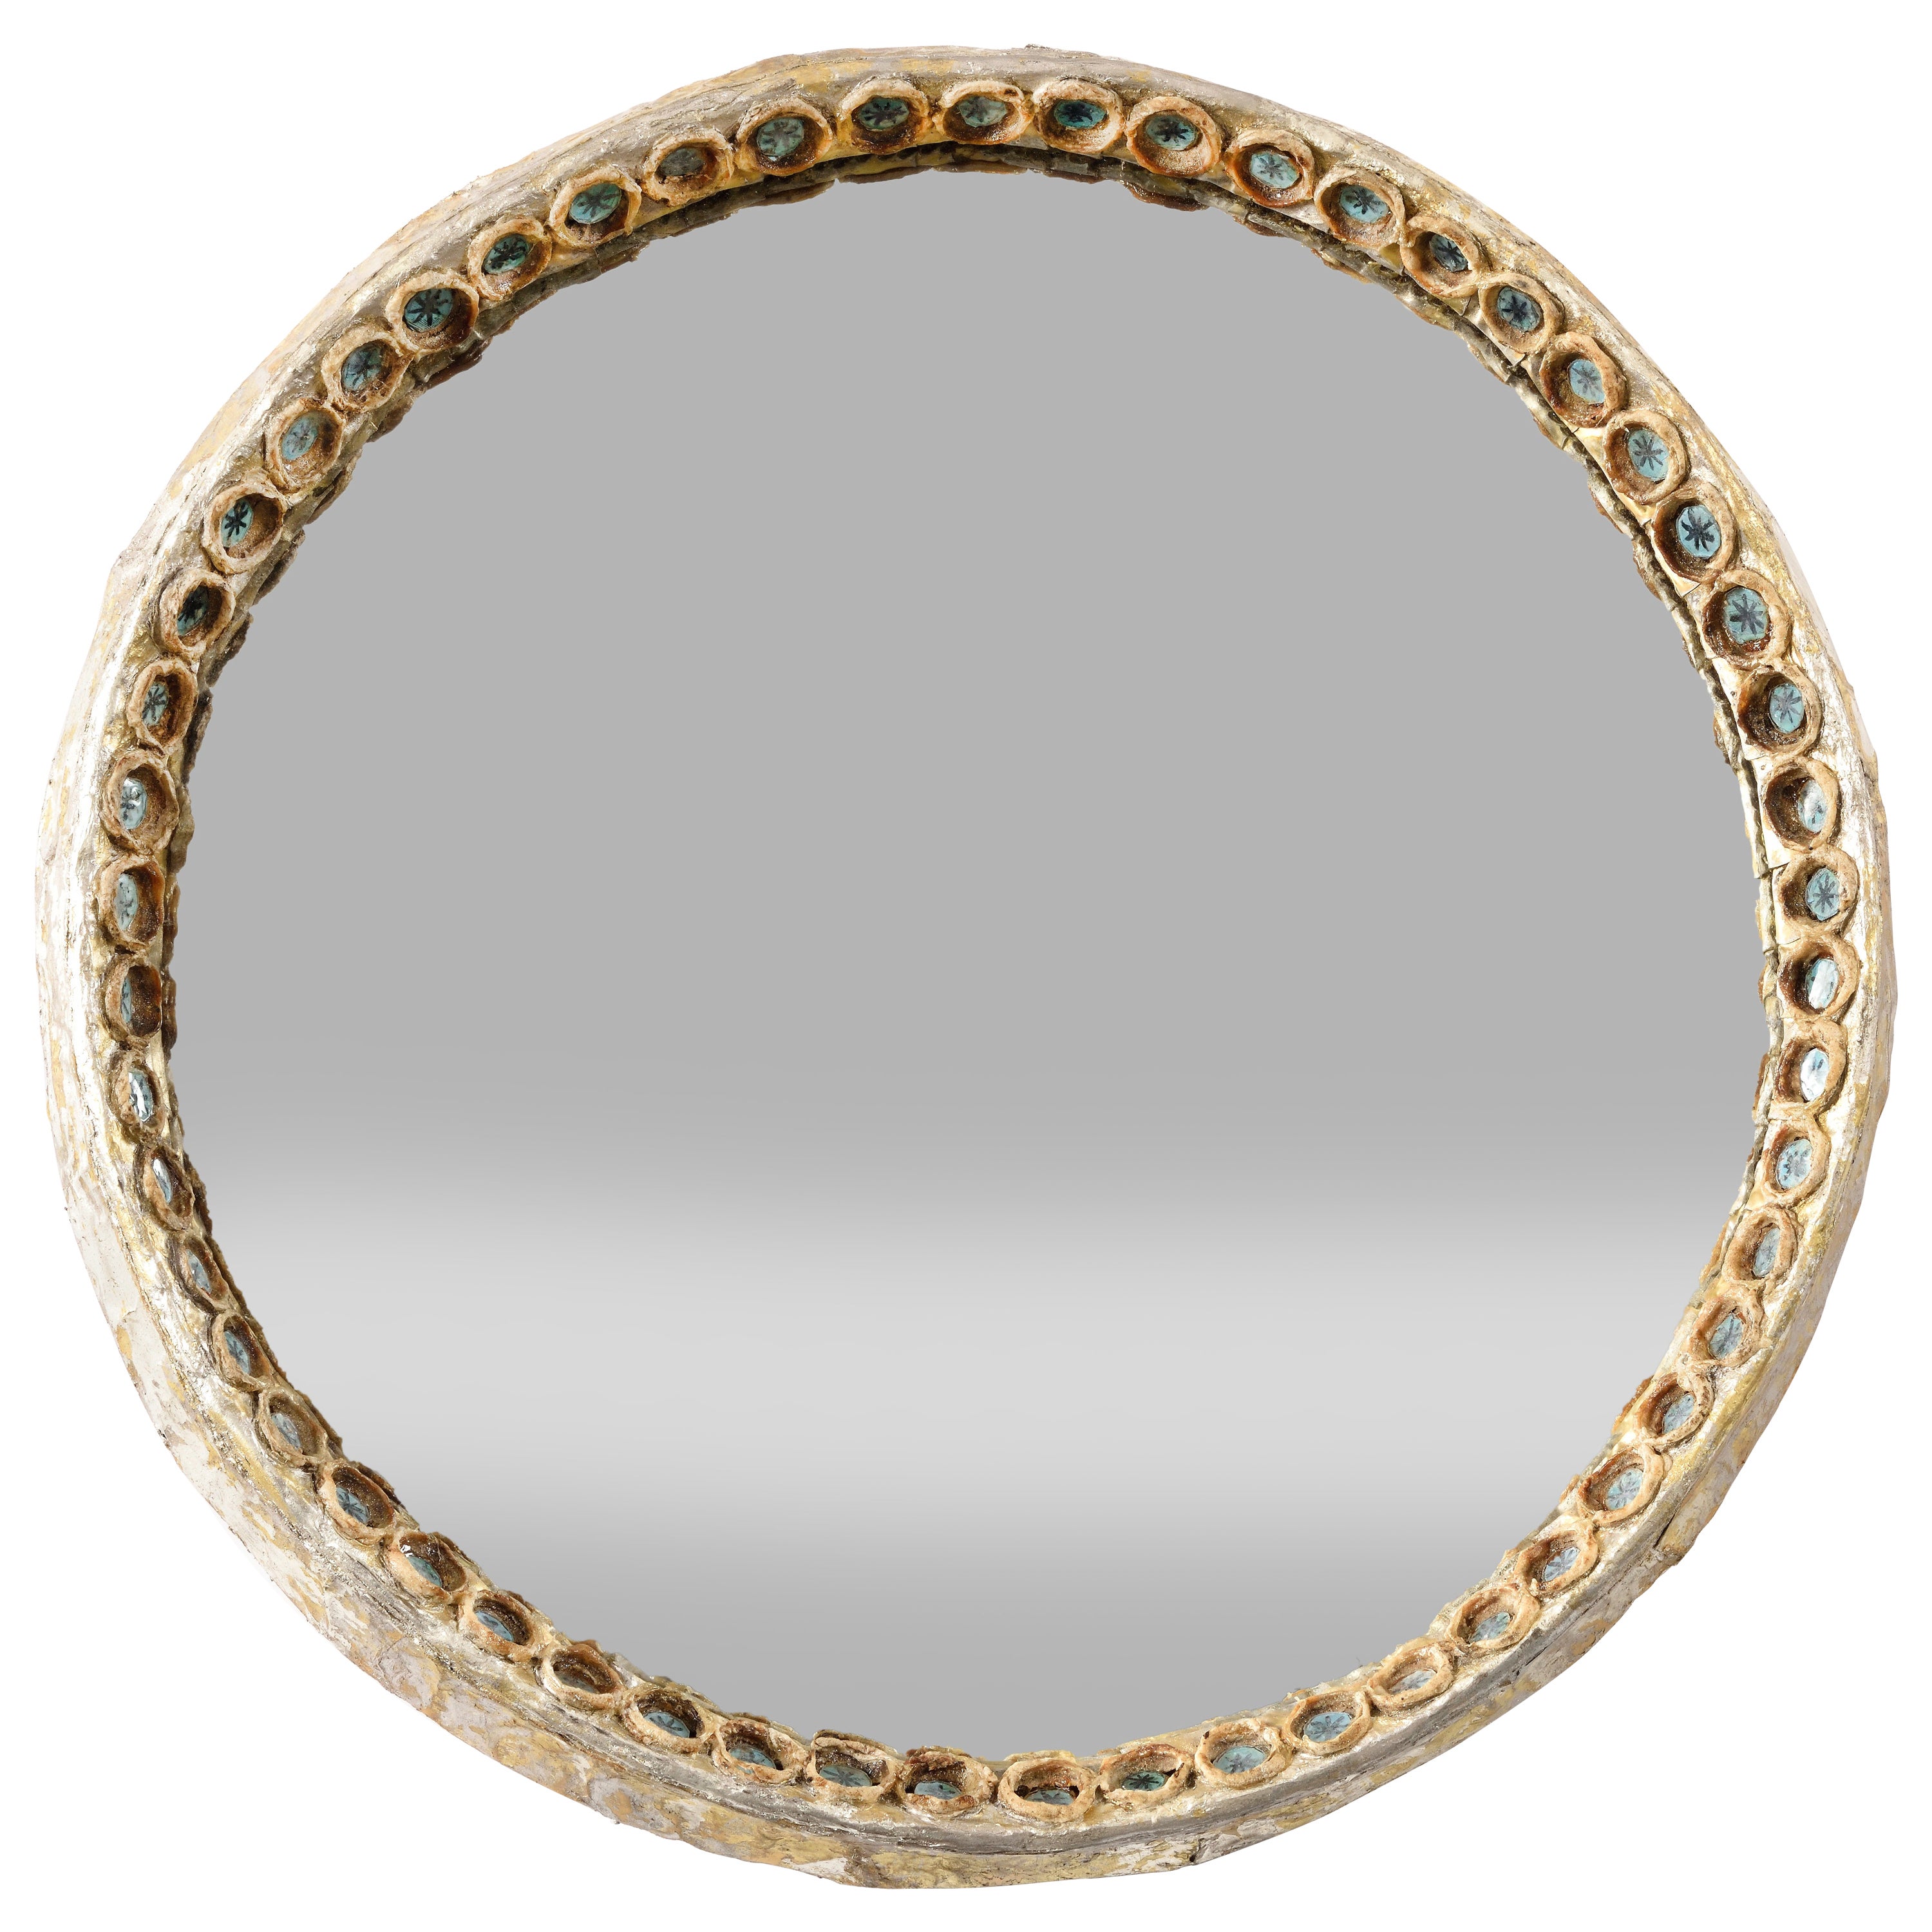 Line Vautrin's Blue Chips mirror from the '60s 